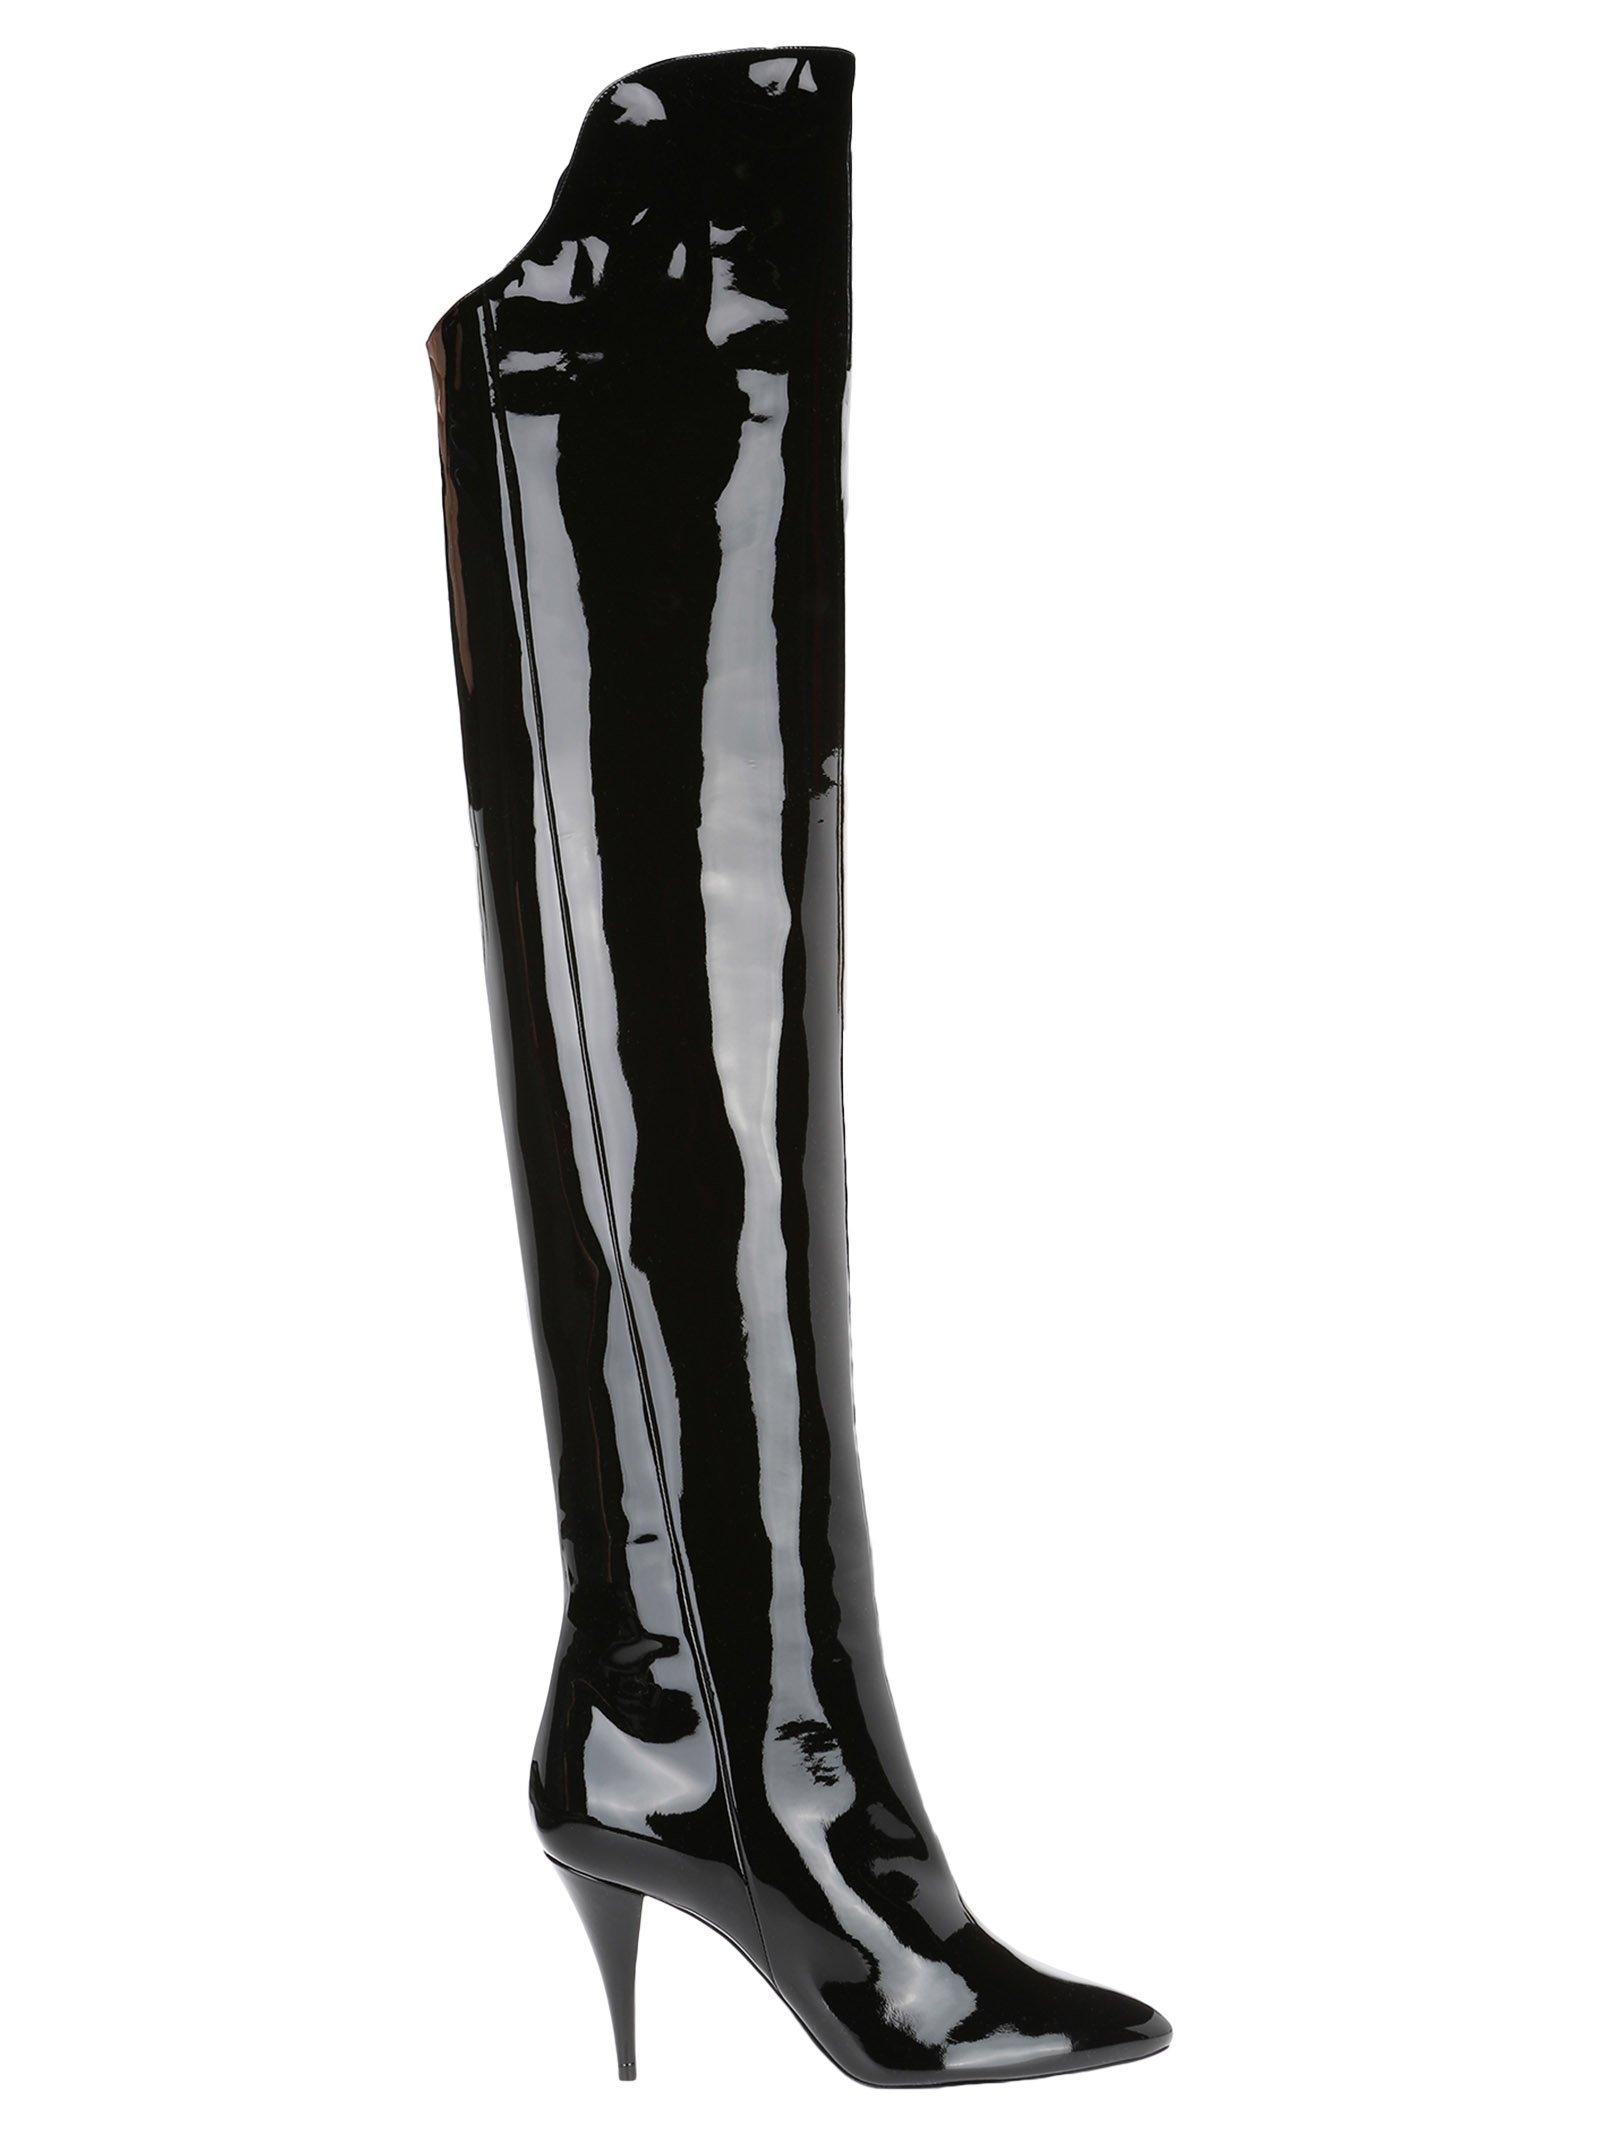 Saint Laurent Leather Over The Knee Boots in Black - Lyst